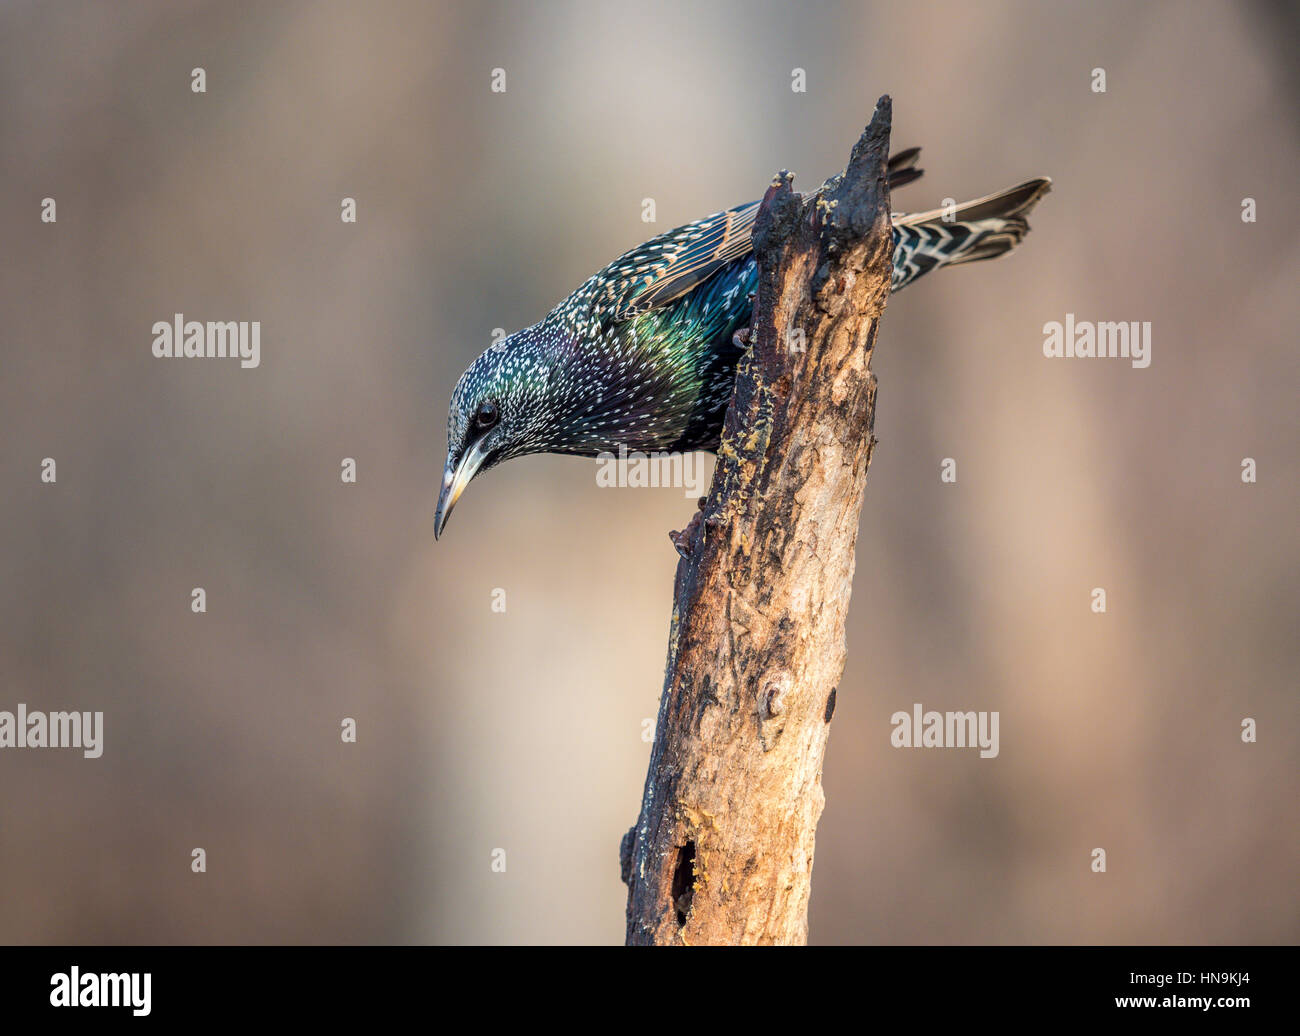 common starling,Sturnus vulgaris also known as the European starling Stock Photo